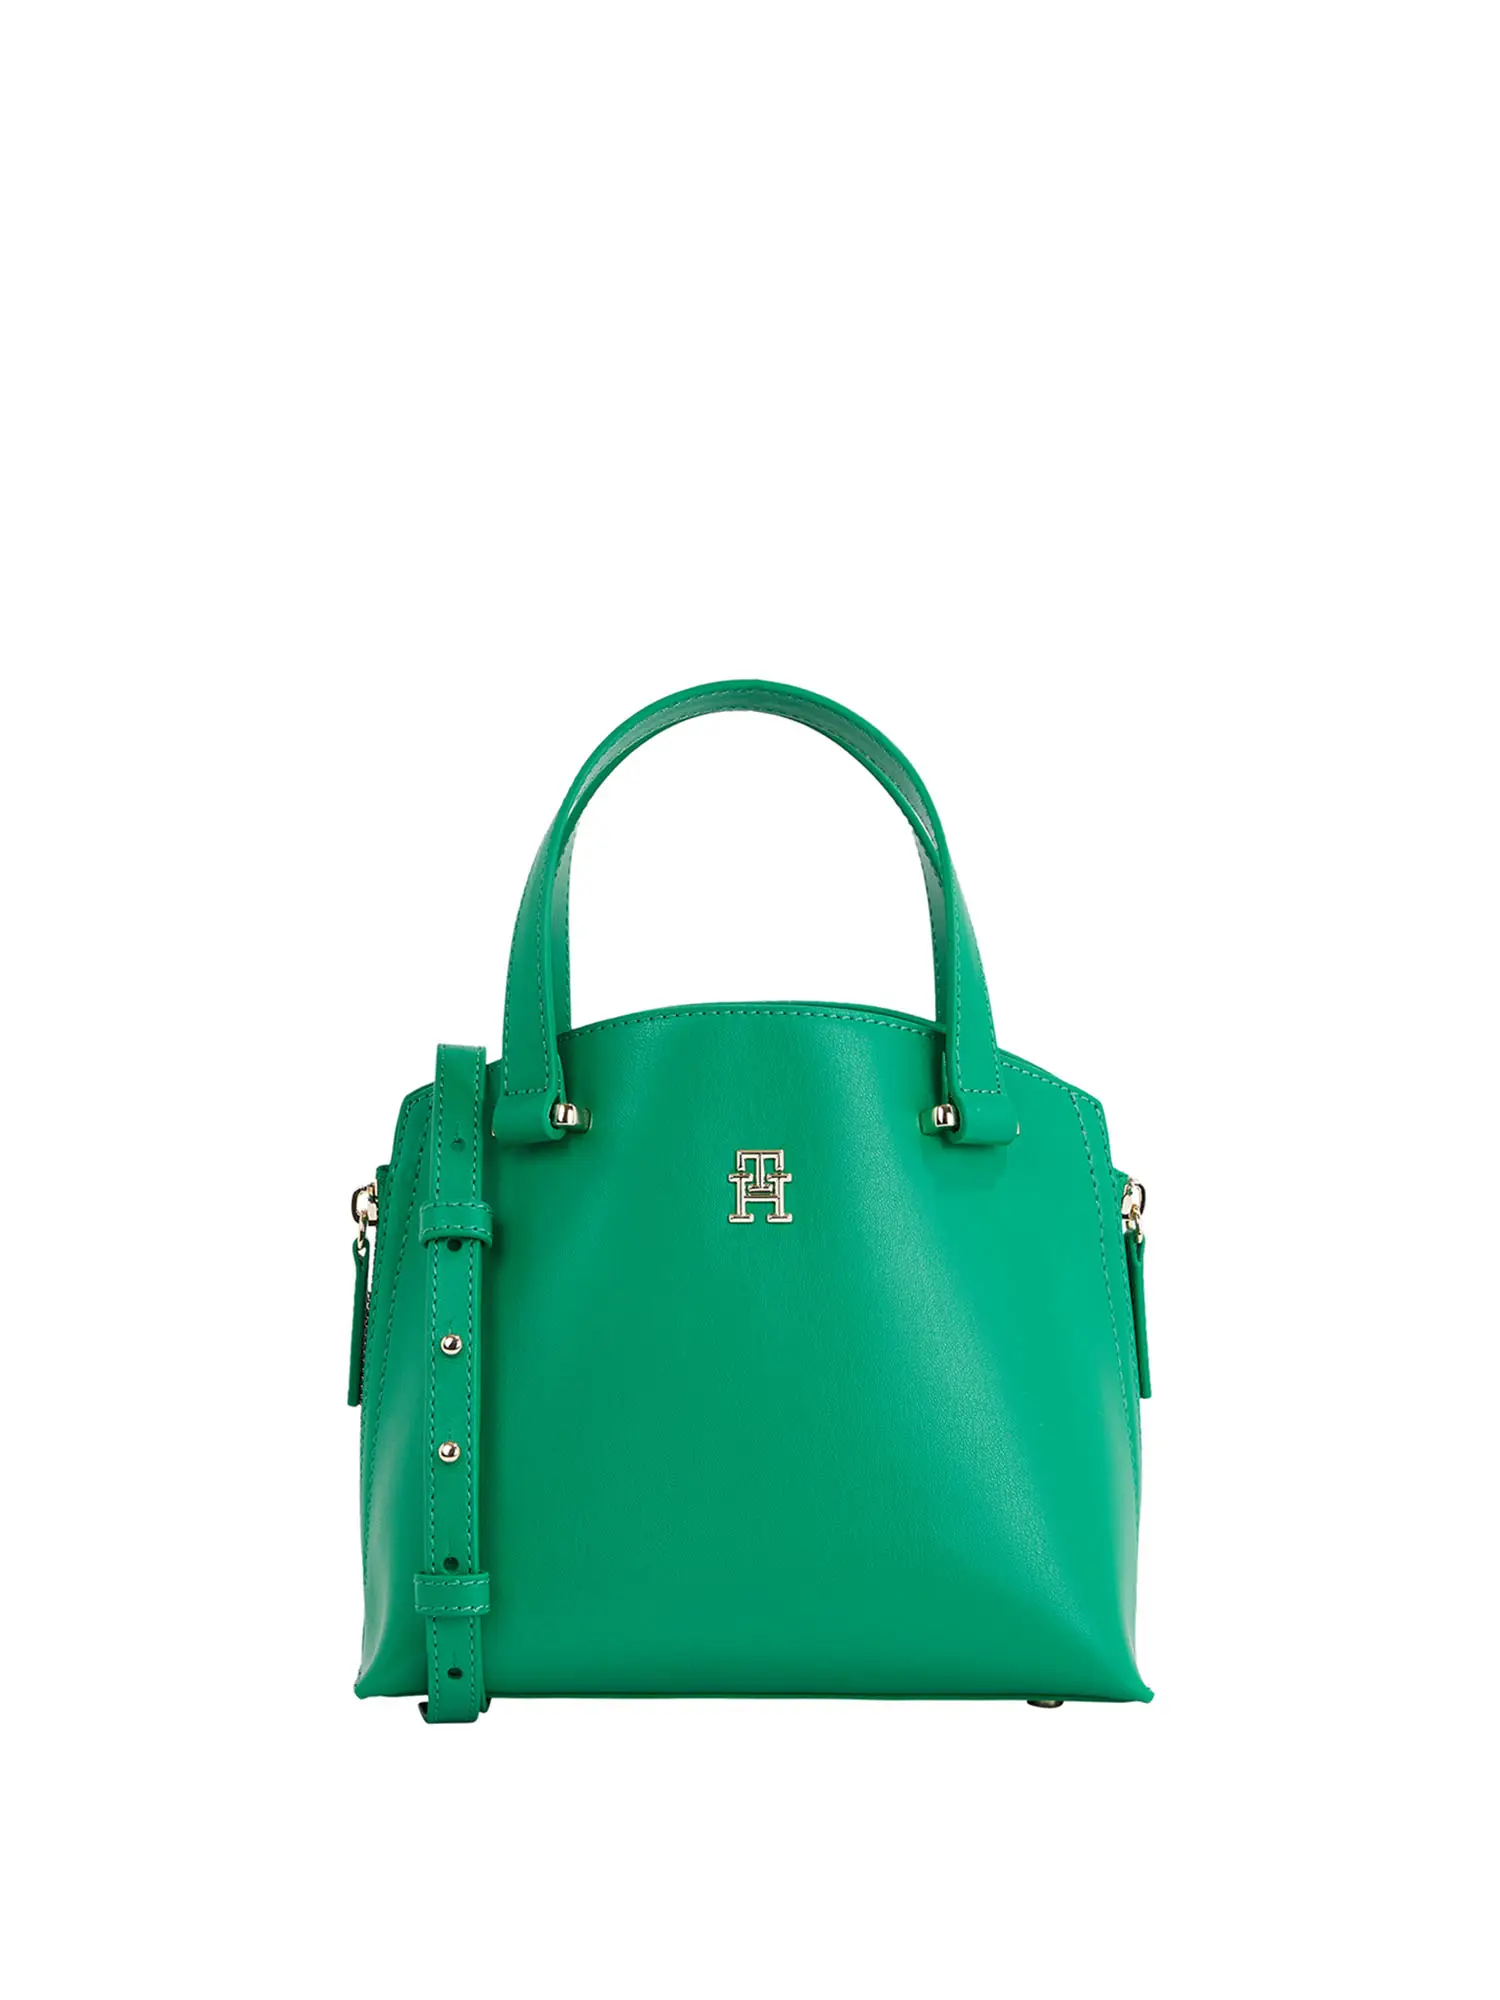 TOTE DONNA - TOMMY HILFIGER - AW0AW15968 - VERDE, UNICA